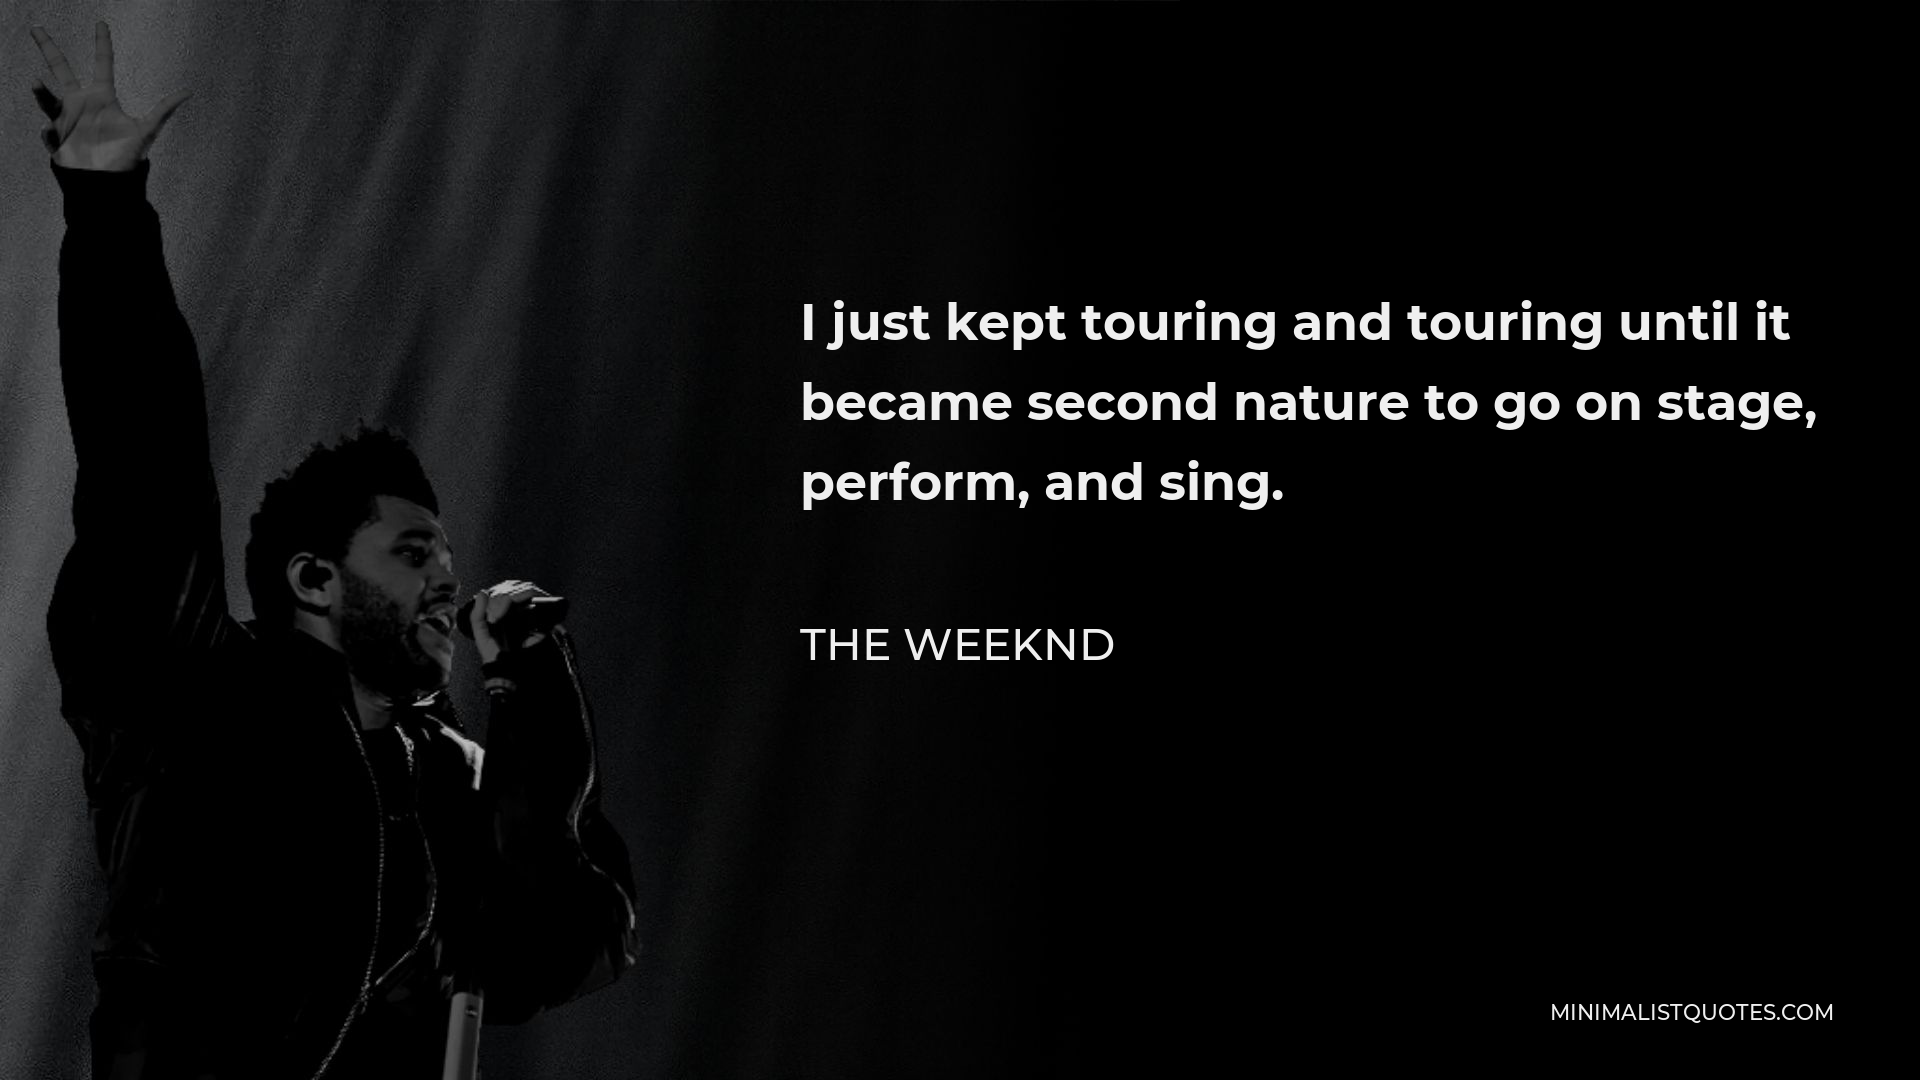 The Weeknd Quote - I just kept touring and touring until it became second nature to go on stage, perform, and sing.